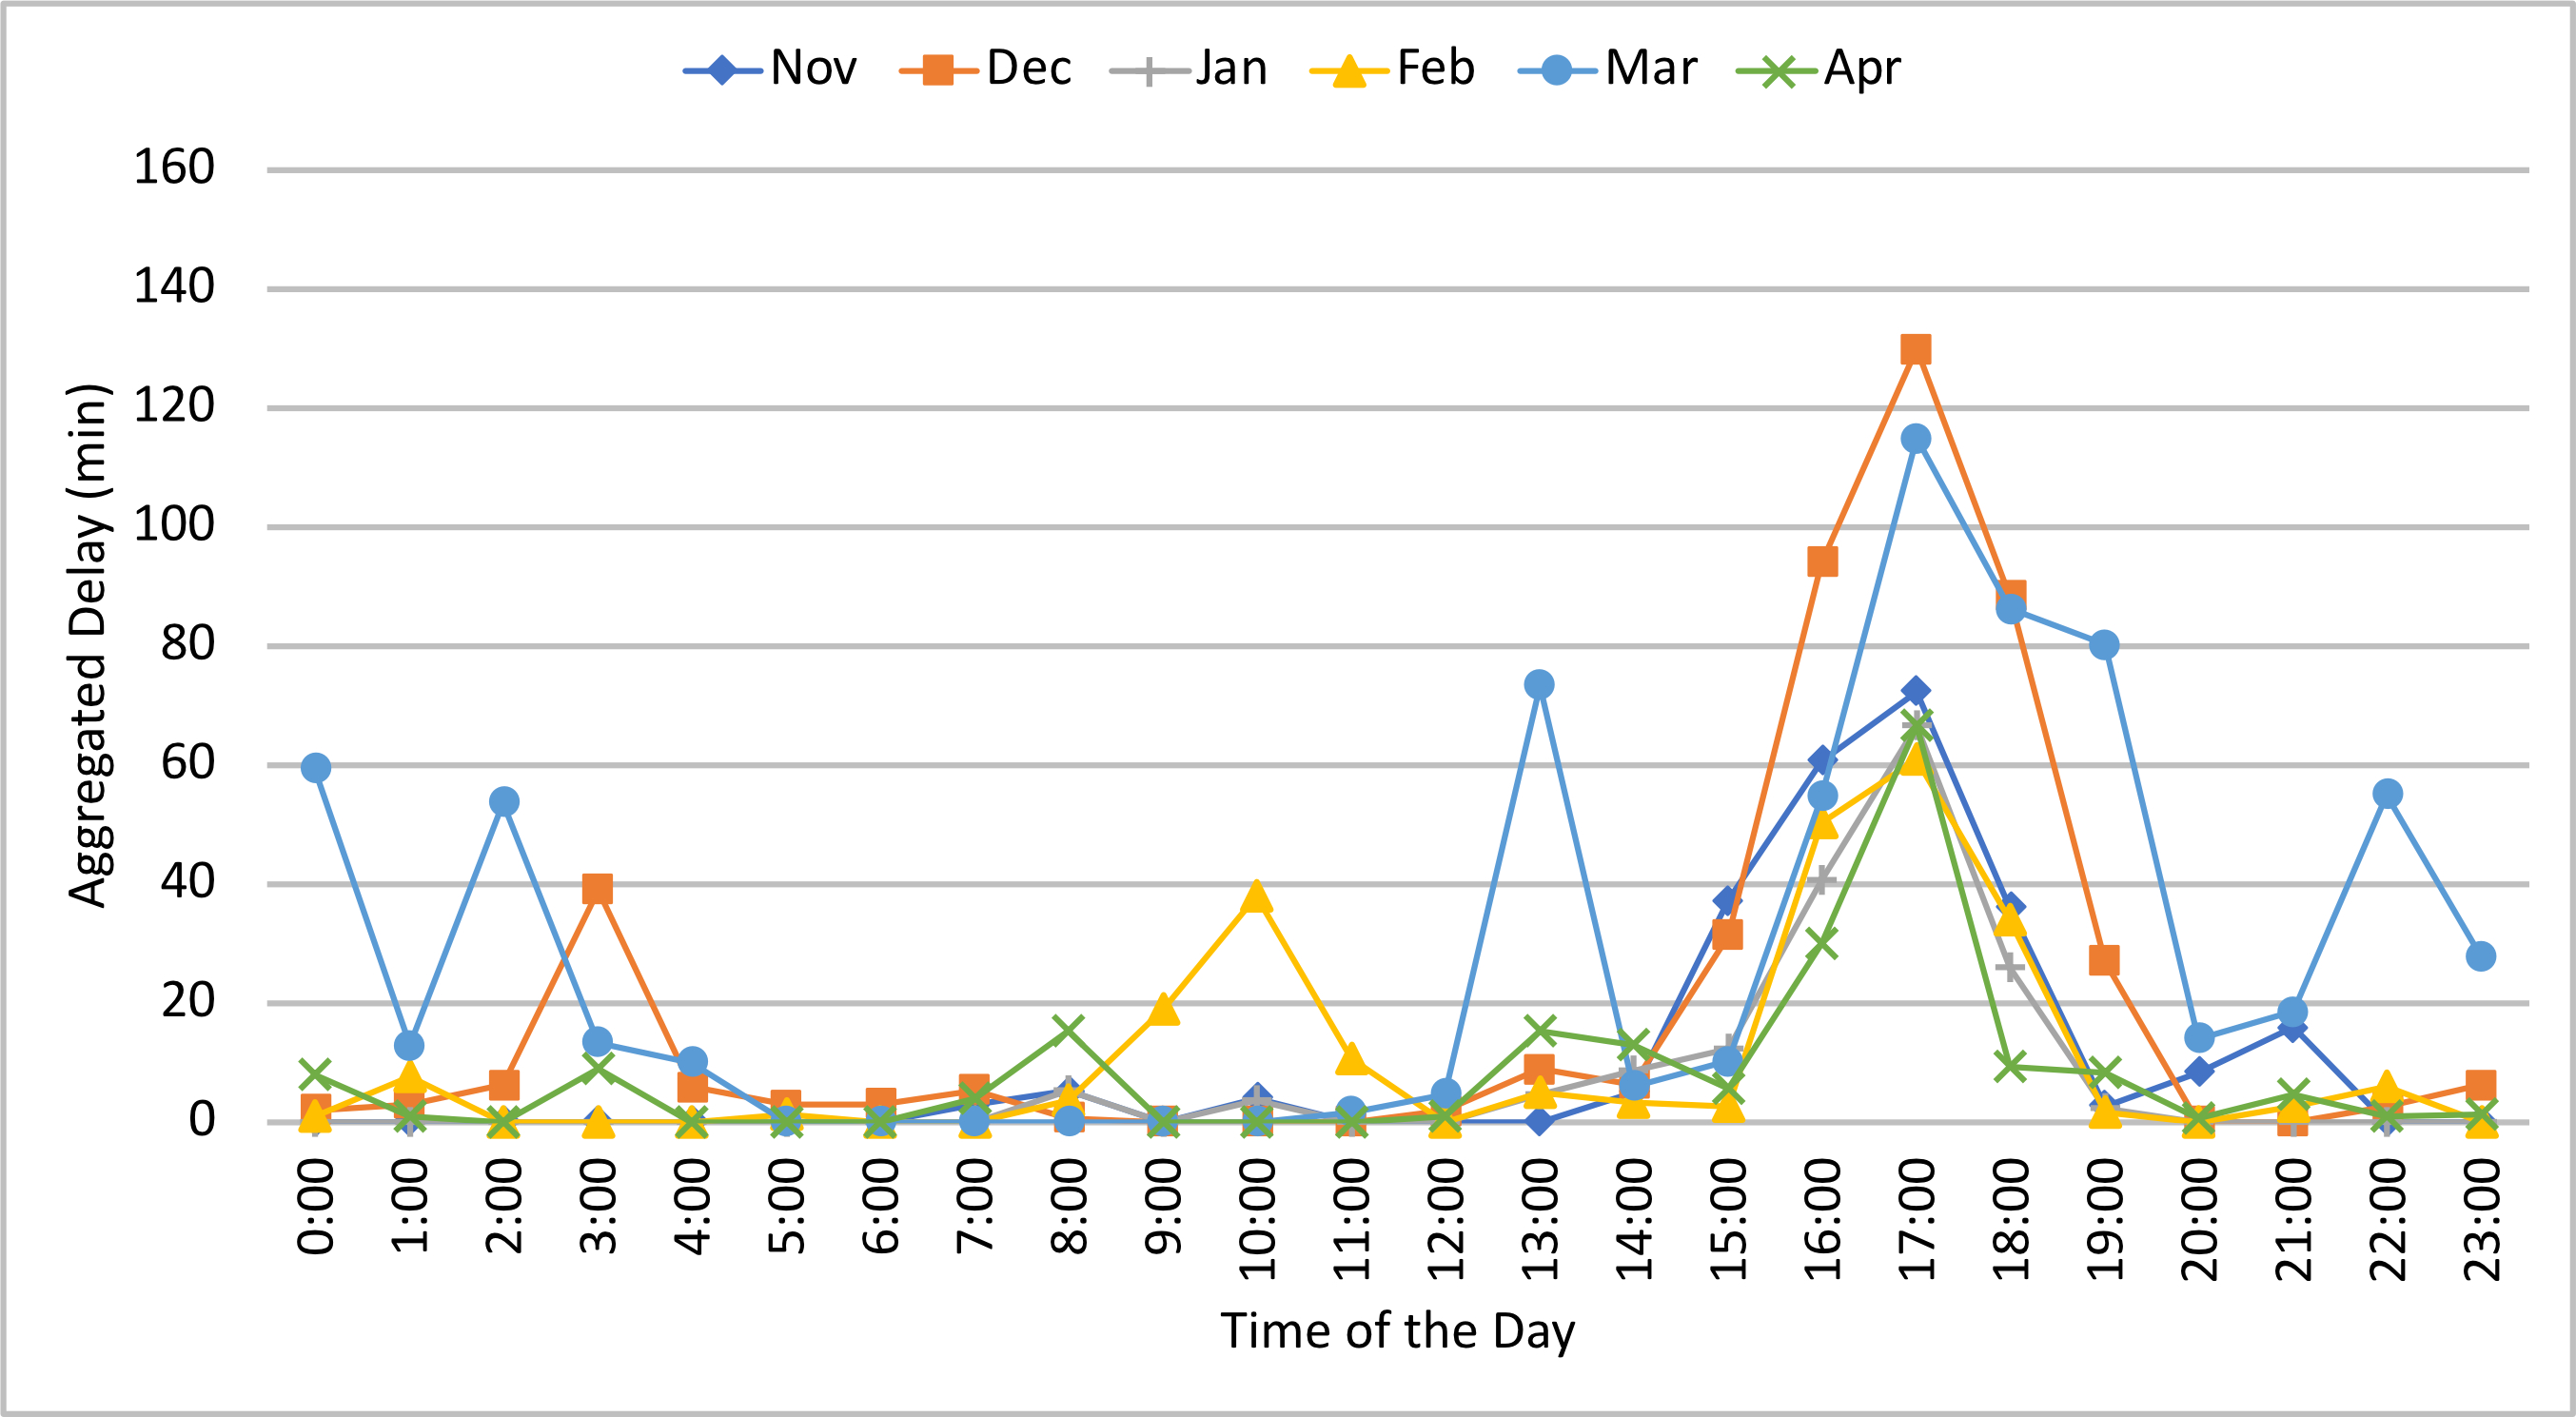 A line graph is shown for aggregated delay by hour of day for each month between November and April. Units are in minutes.  Delays range from about 0 to 130, with most of them between 0 and 40.  Delays are lowest between 4:00 AM and 9:00 AM and highest between 4:00 PM and 7:00 PM.